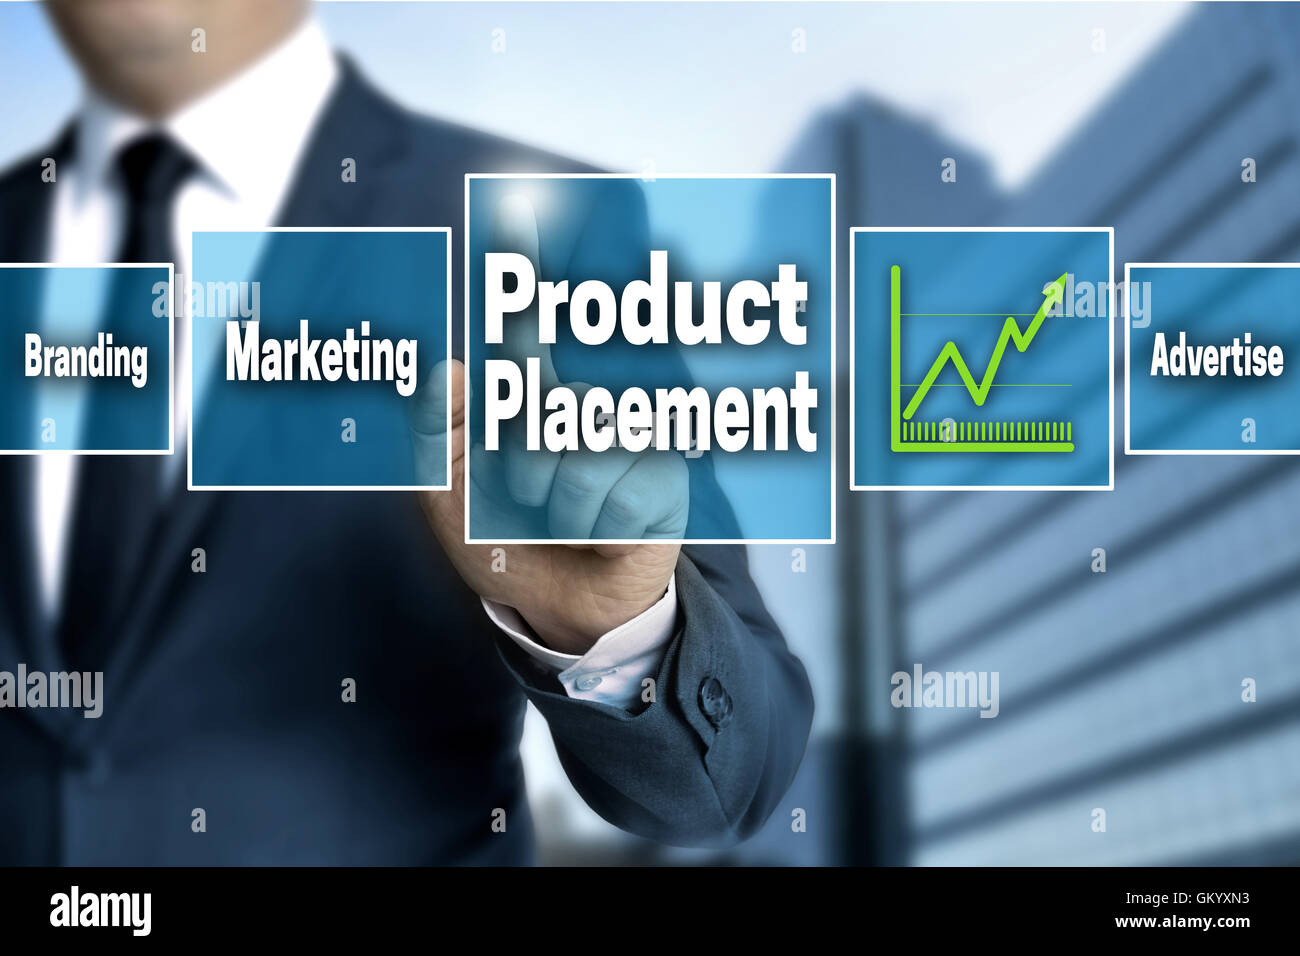 Product Placement touchscreen is operated by businessman. Stock Photo